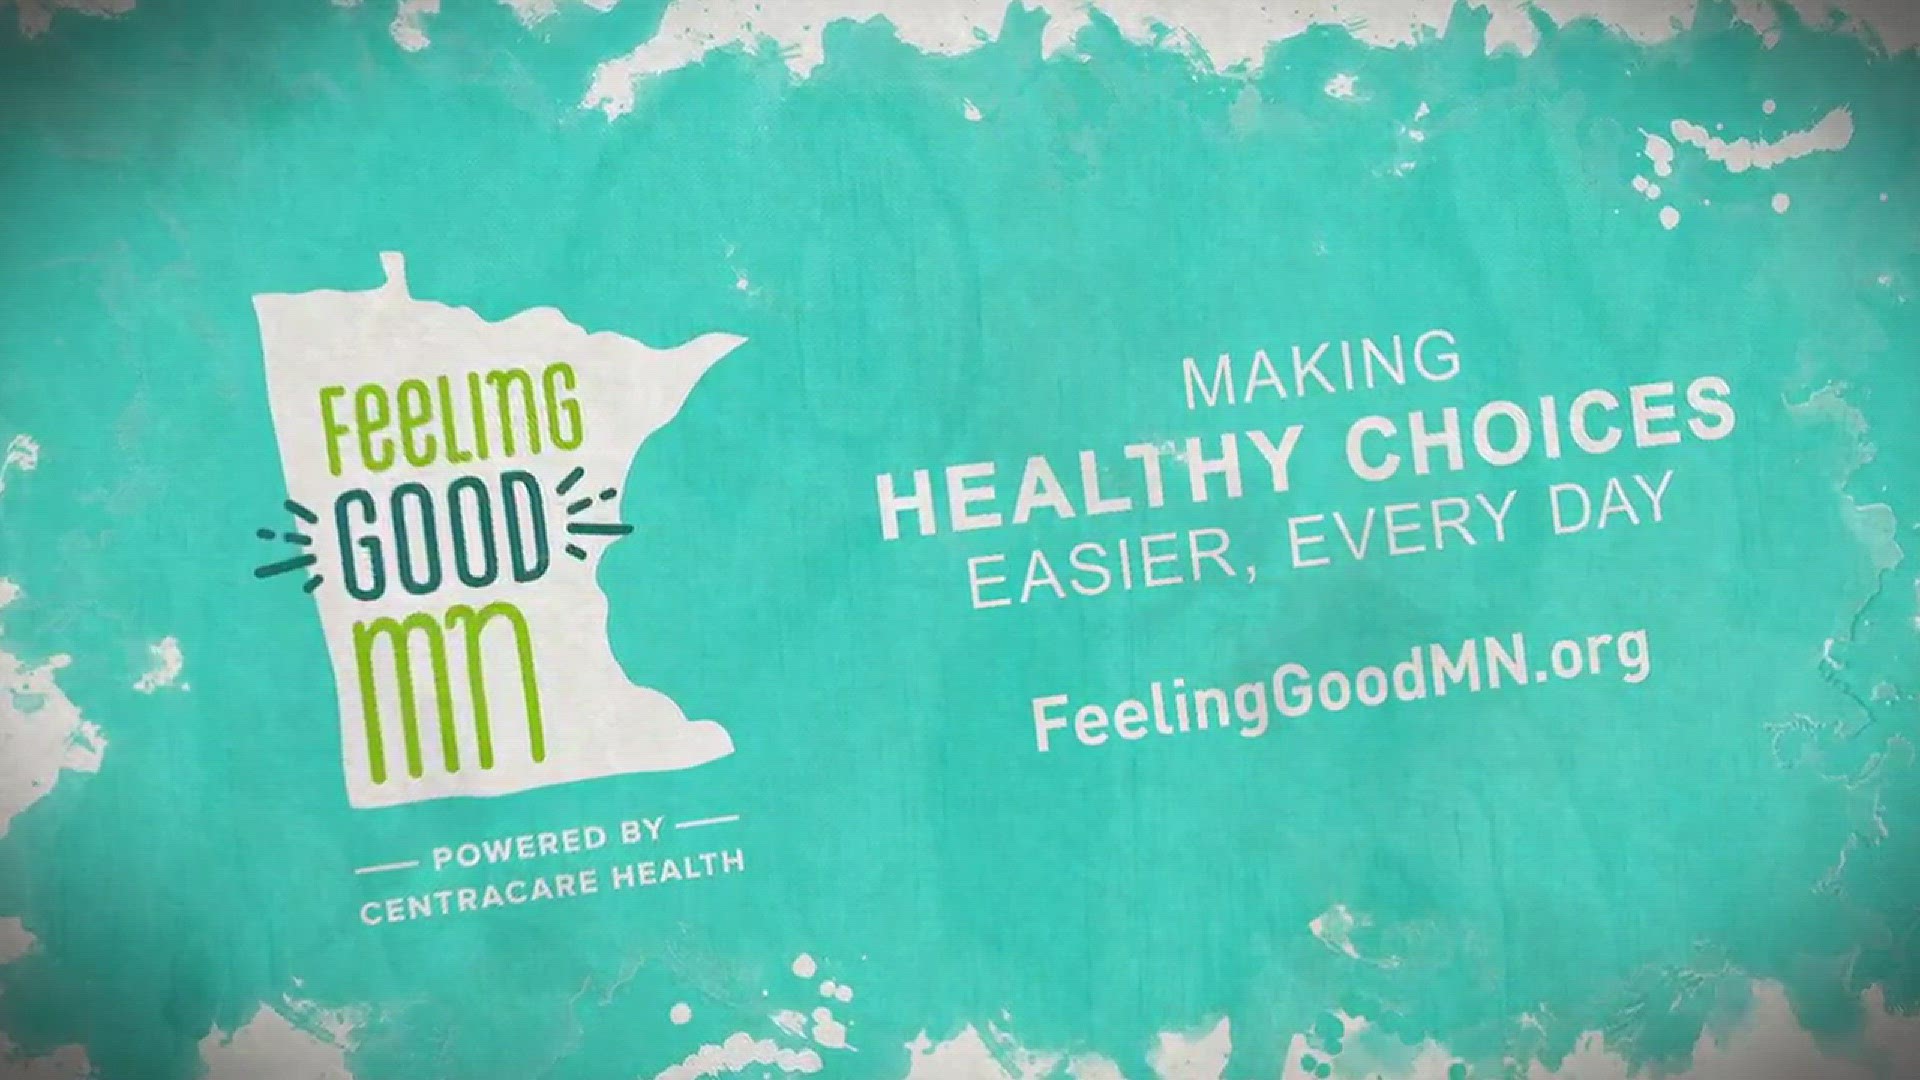 In this month's Feeling Good Minnesota segment, we are focusing on curbing childhood obesity and a program that encourages children to make healthy choices.